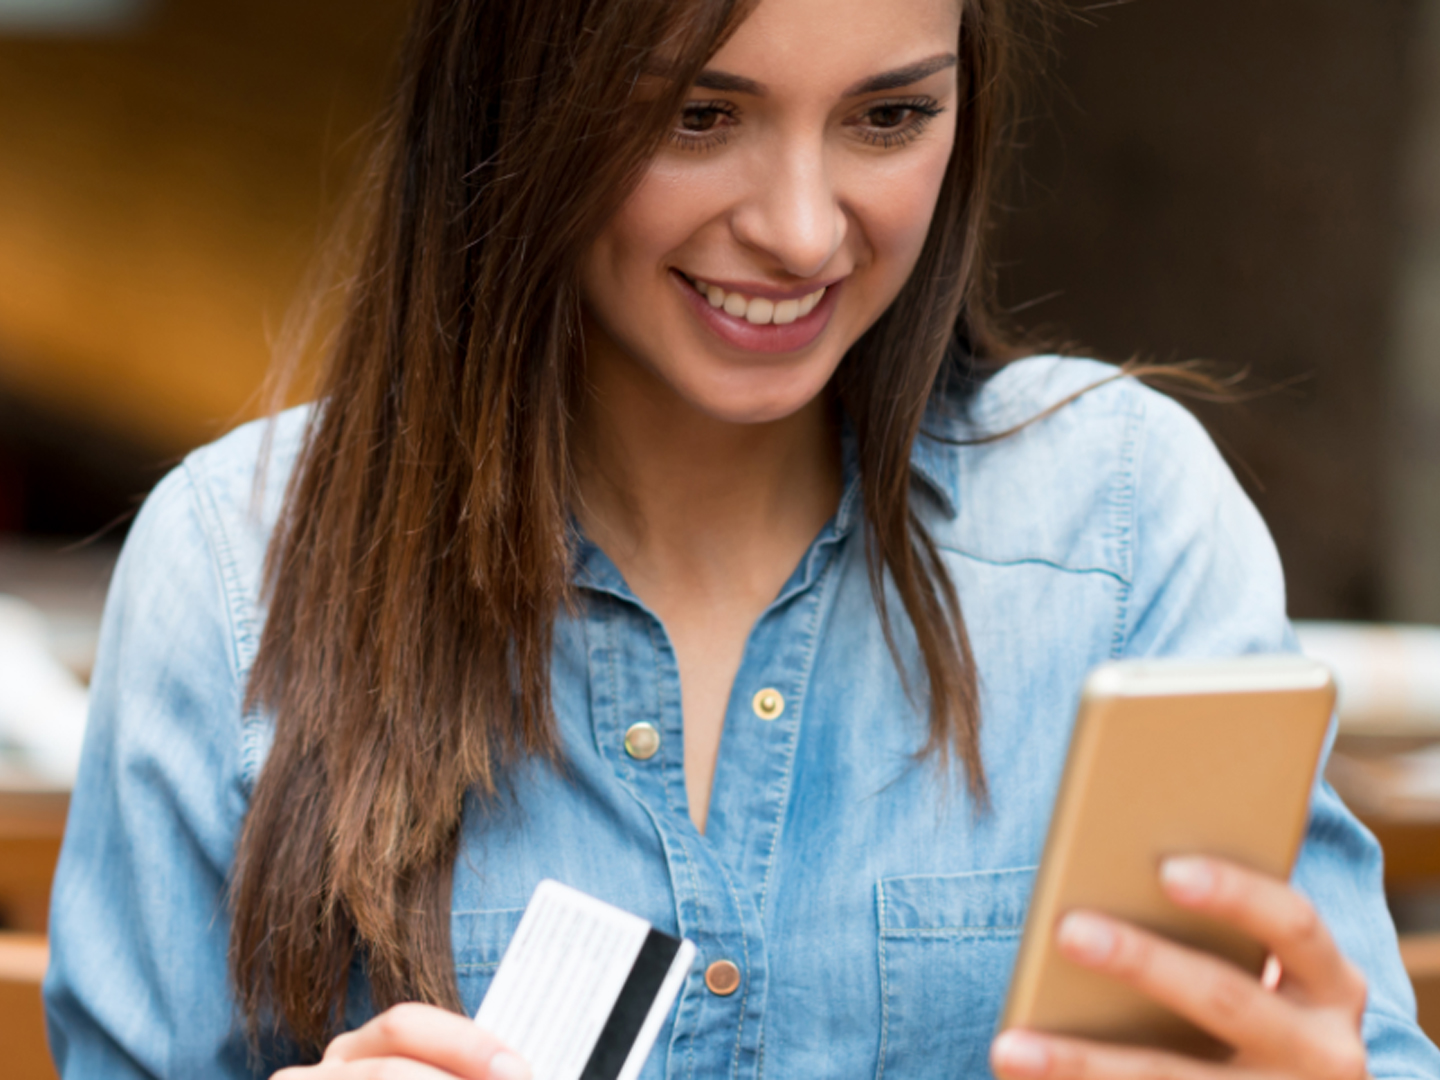 Woman wearing blue shirt looking at mobile phone while holding credit card.